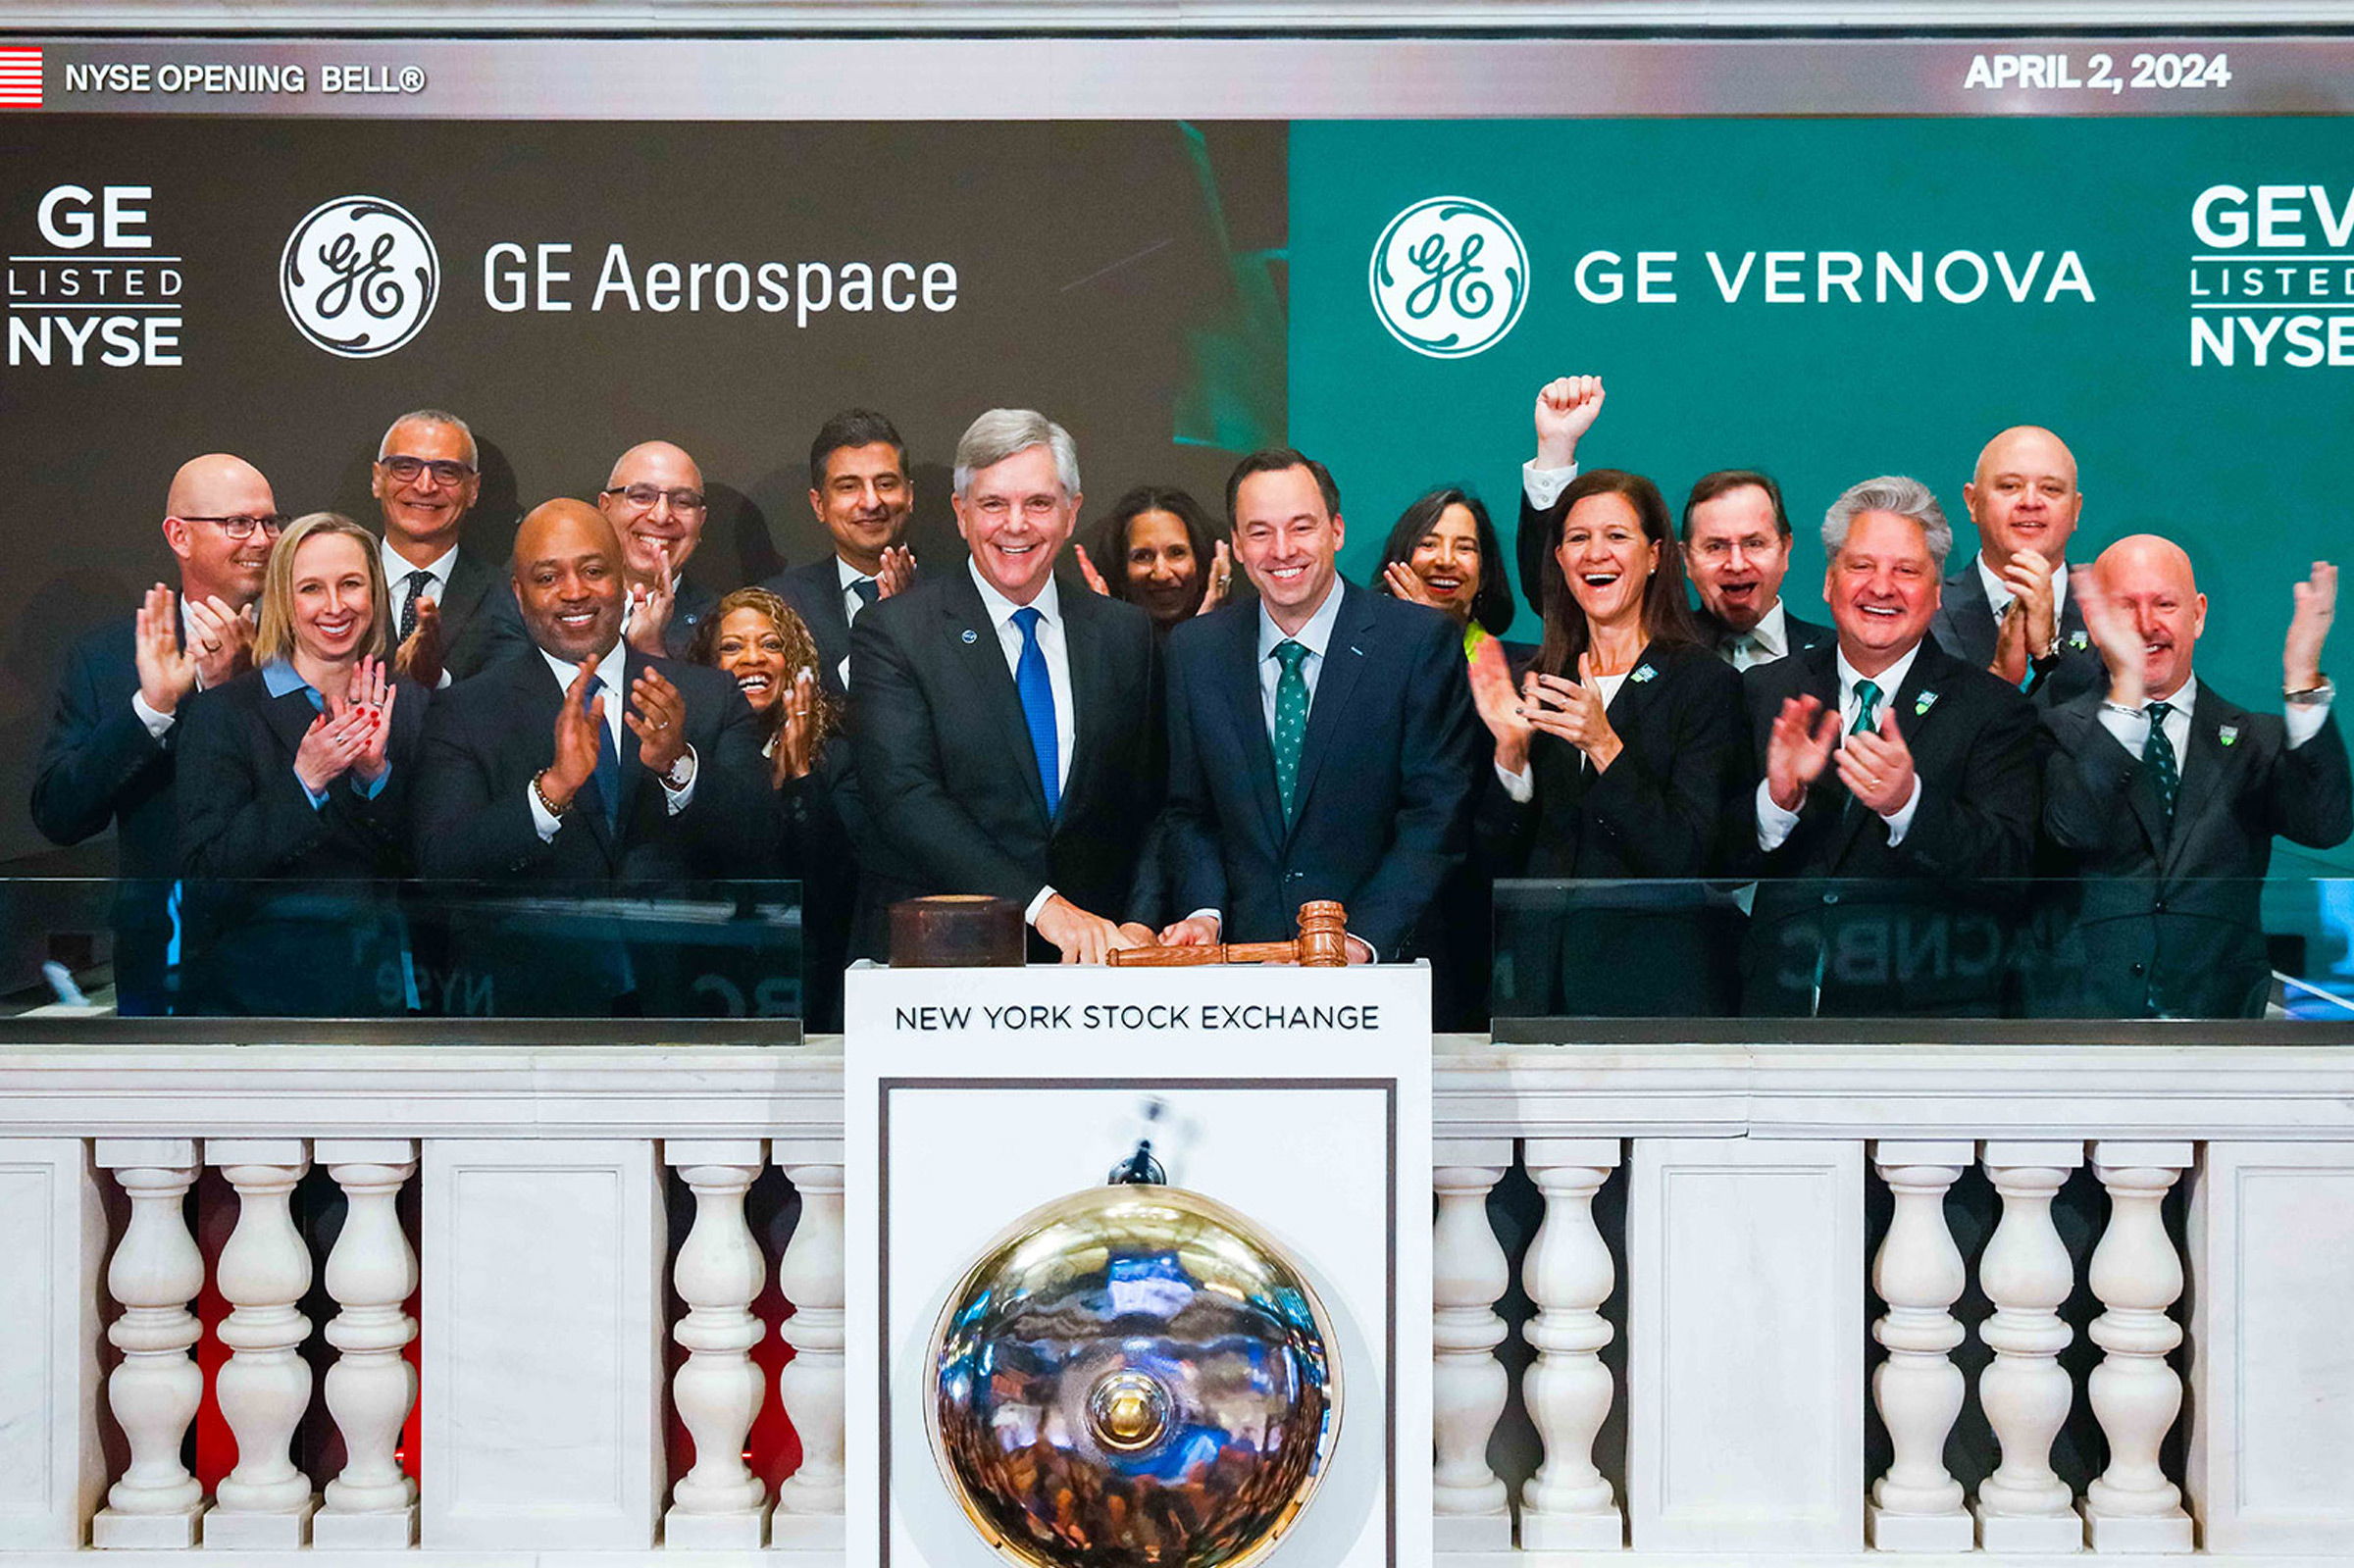 GE Aerospace and GE Vernova rang the opening bell together on April 2, 2024, at the NYSE © GE Vernova